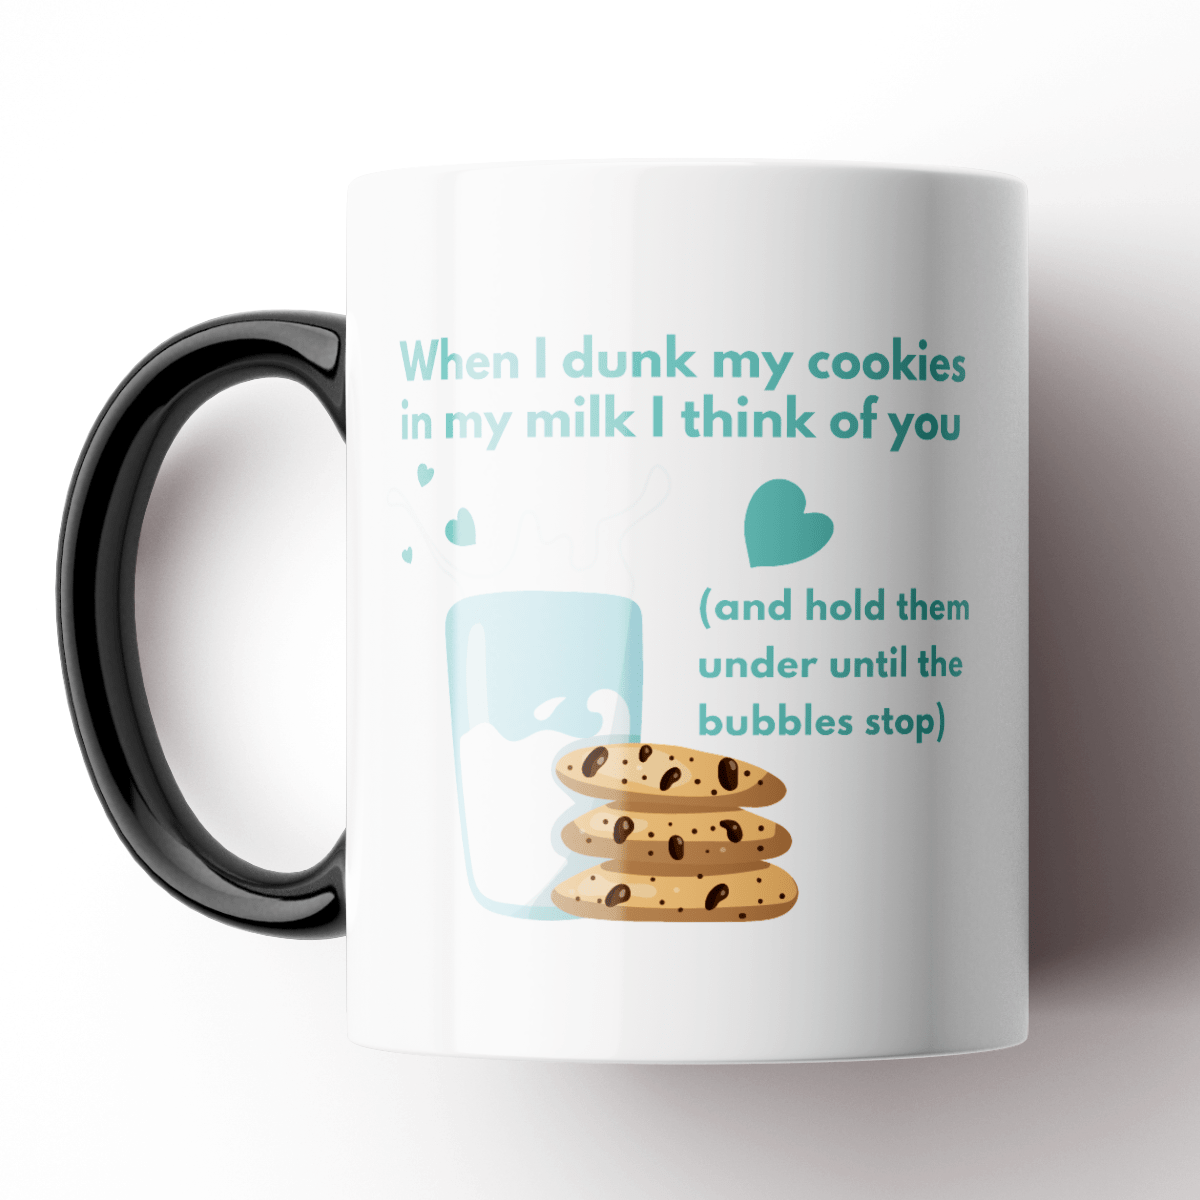 TIGC The Inappropriate Gift Co When I dunk my cookies Mug